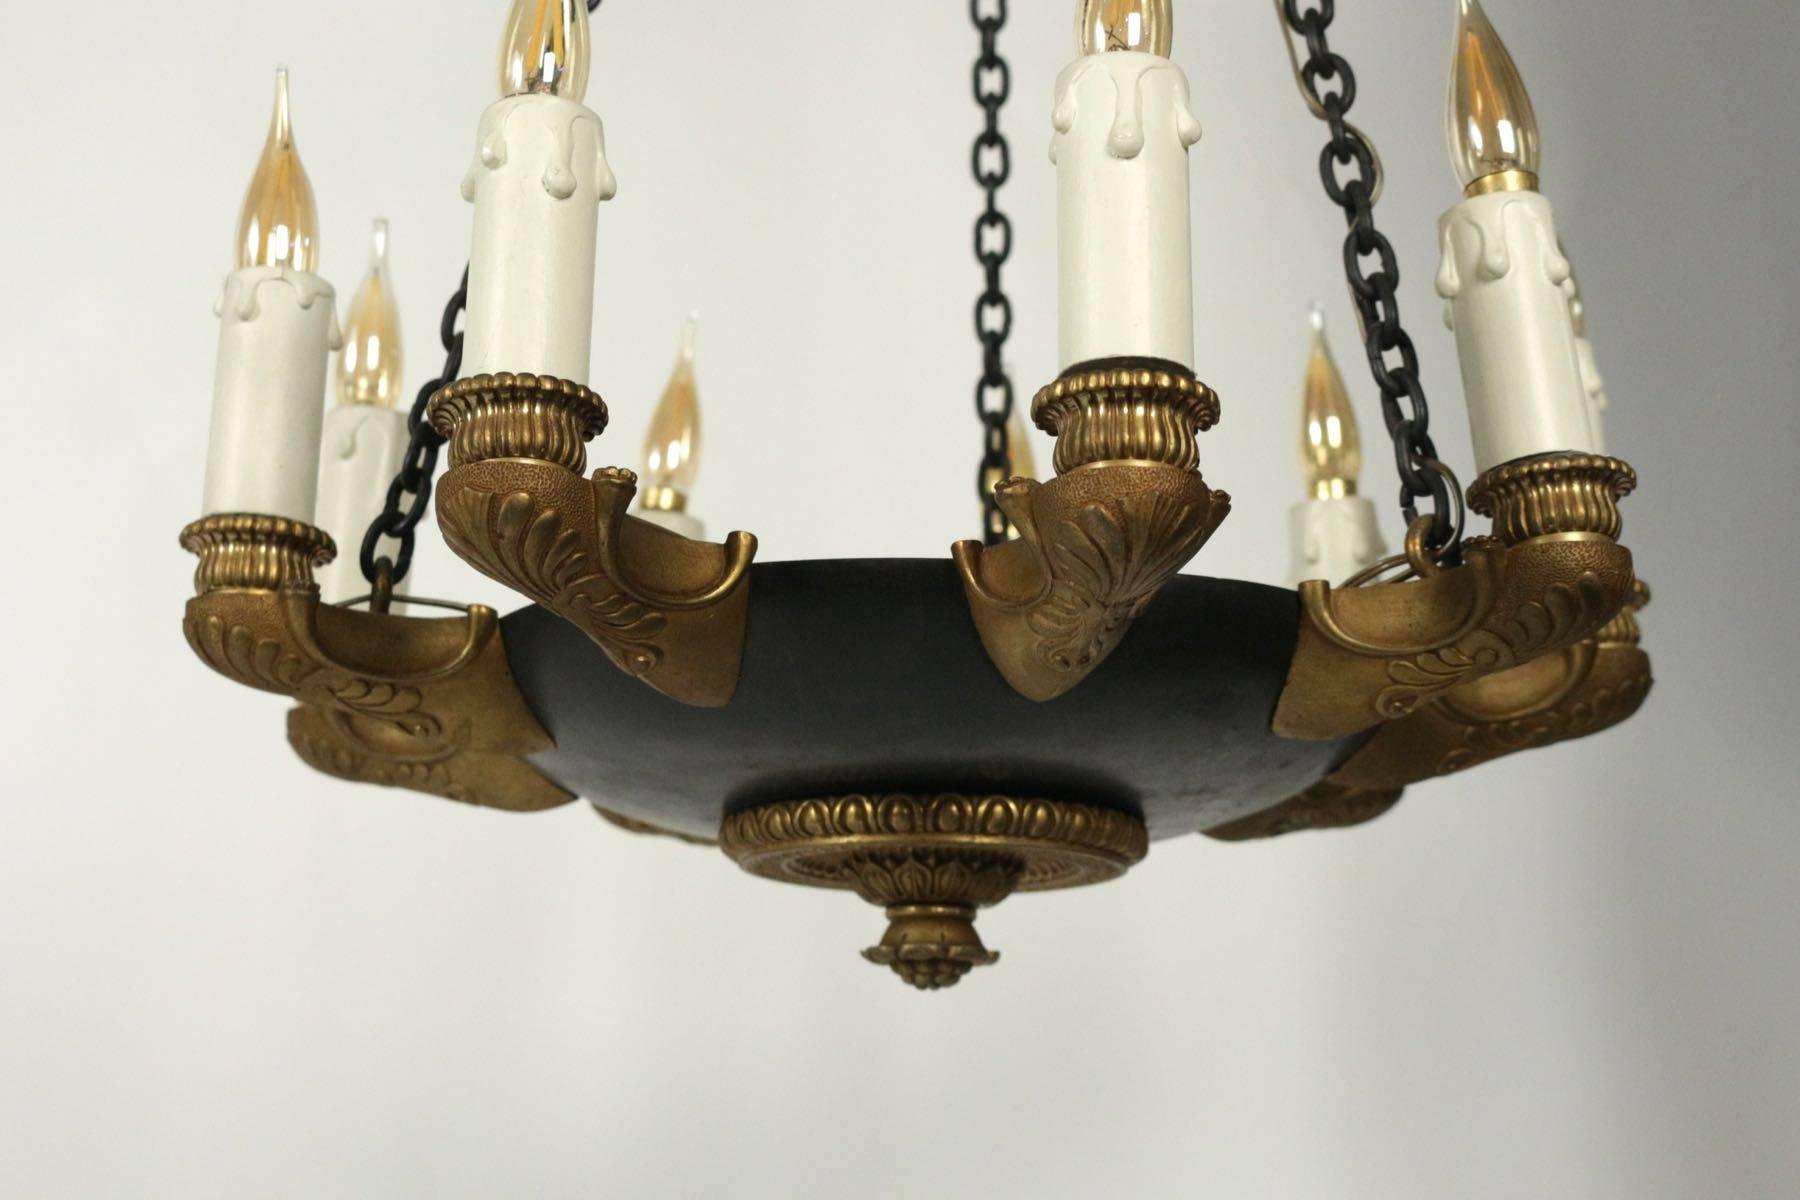 19th Century Small Unusual Empire Chandelier with Many Arms '9 Lights'